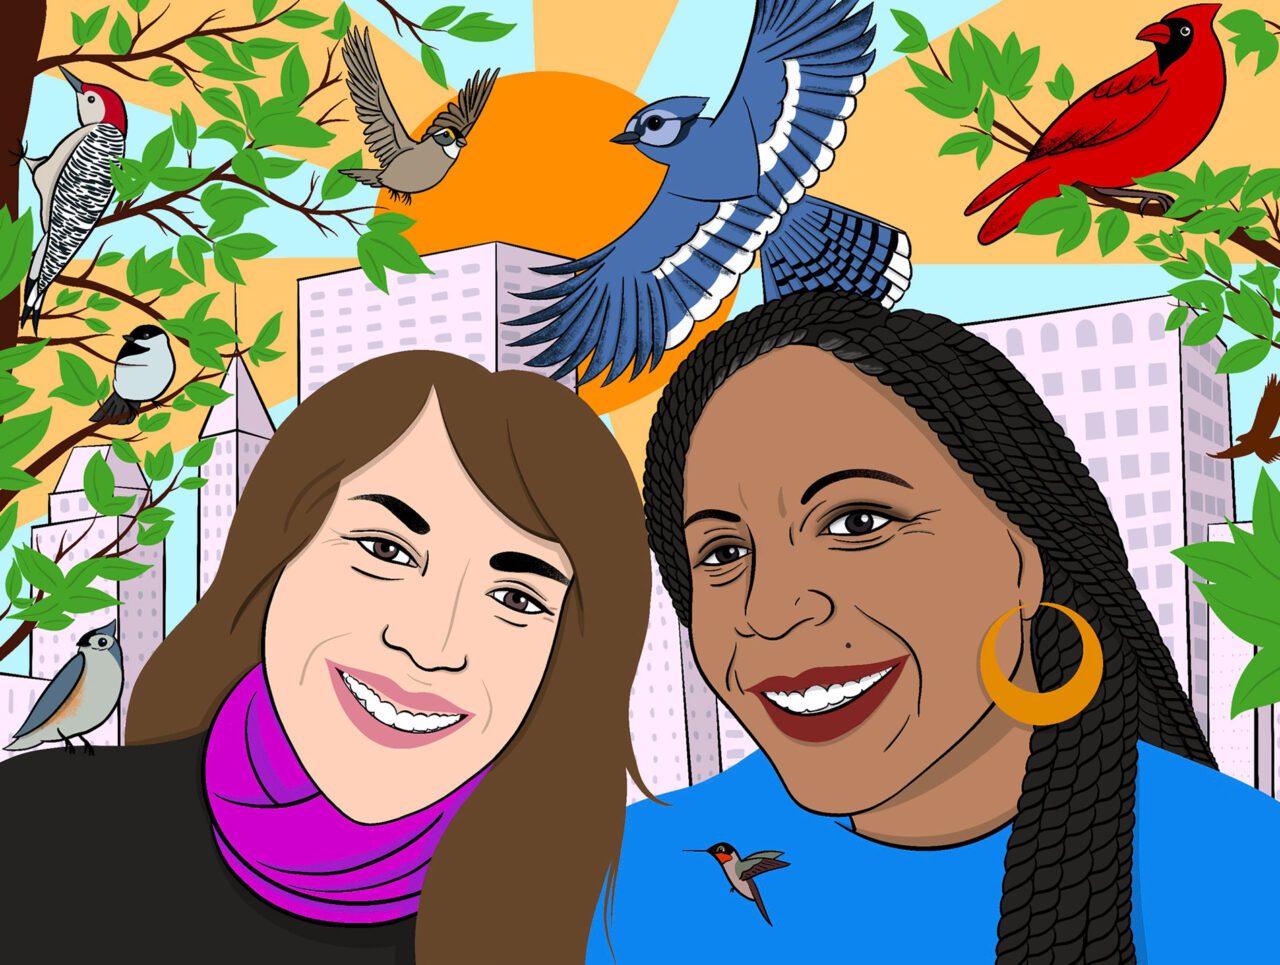 Illustration of two women surrounded by birds in a cityscape.